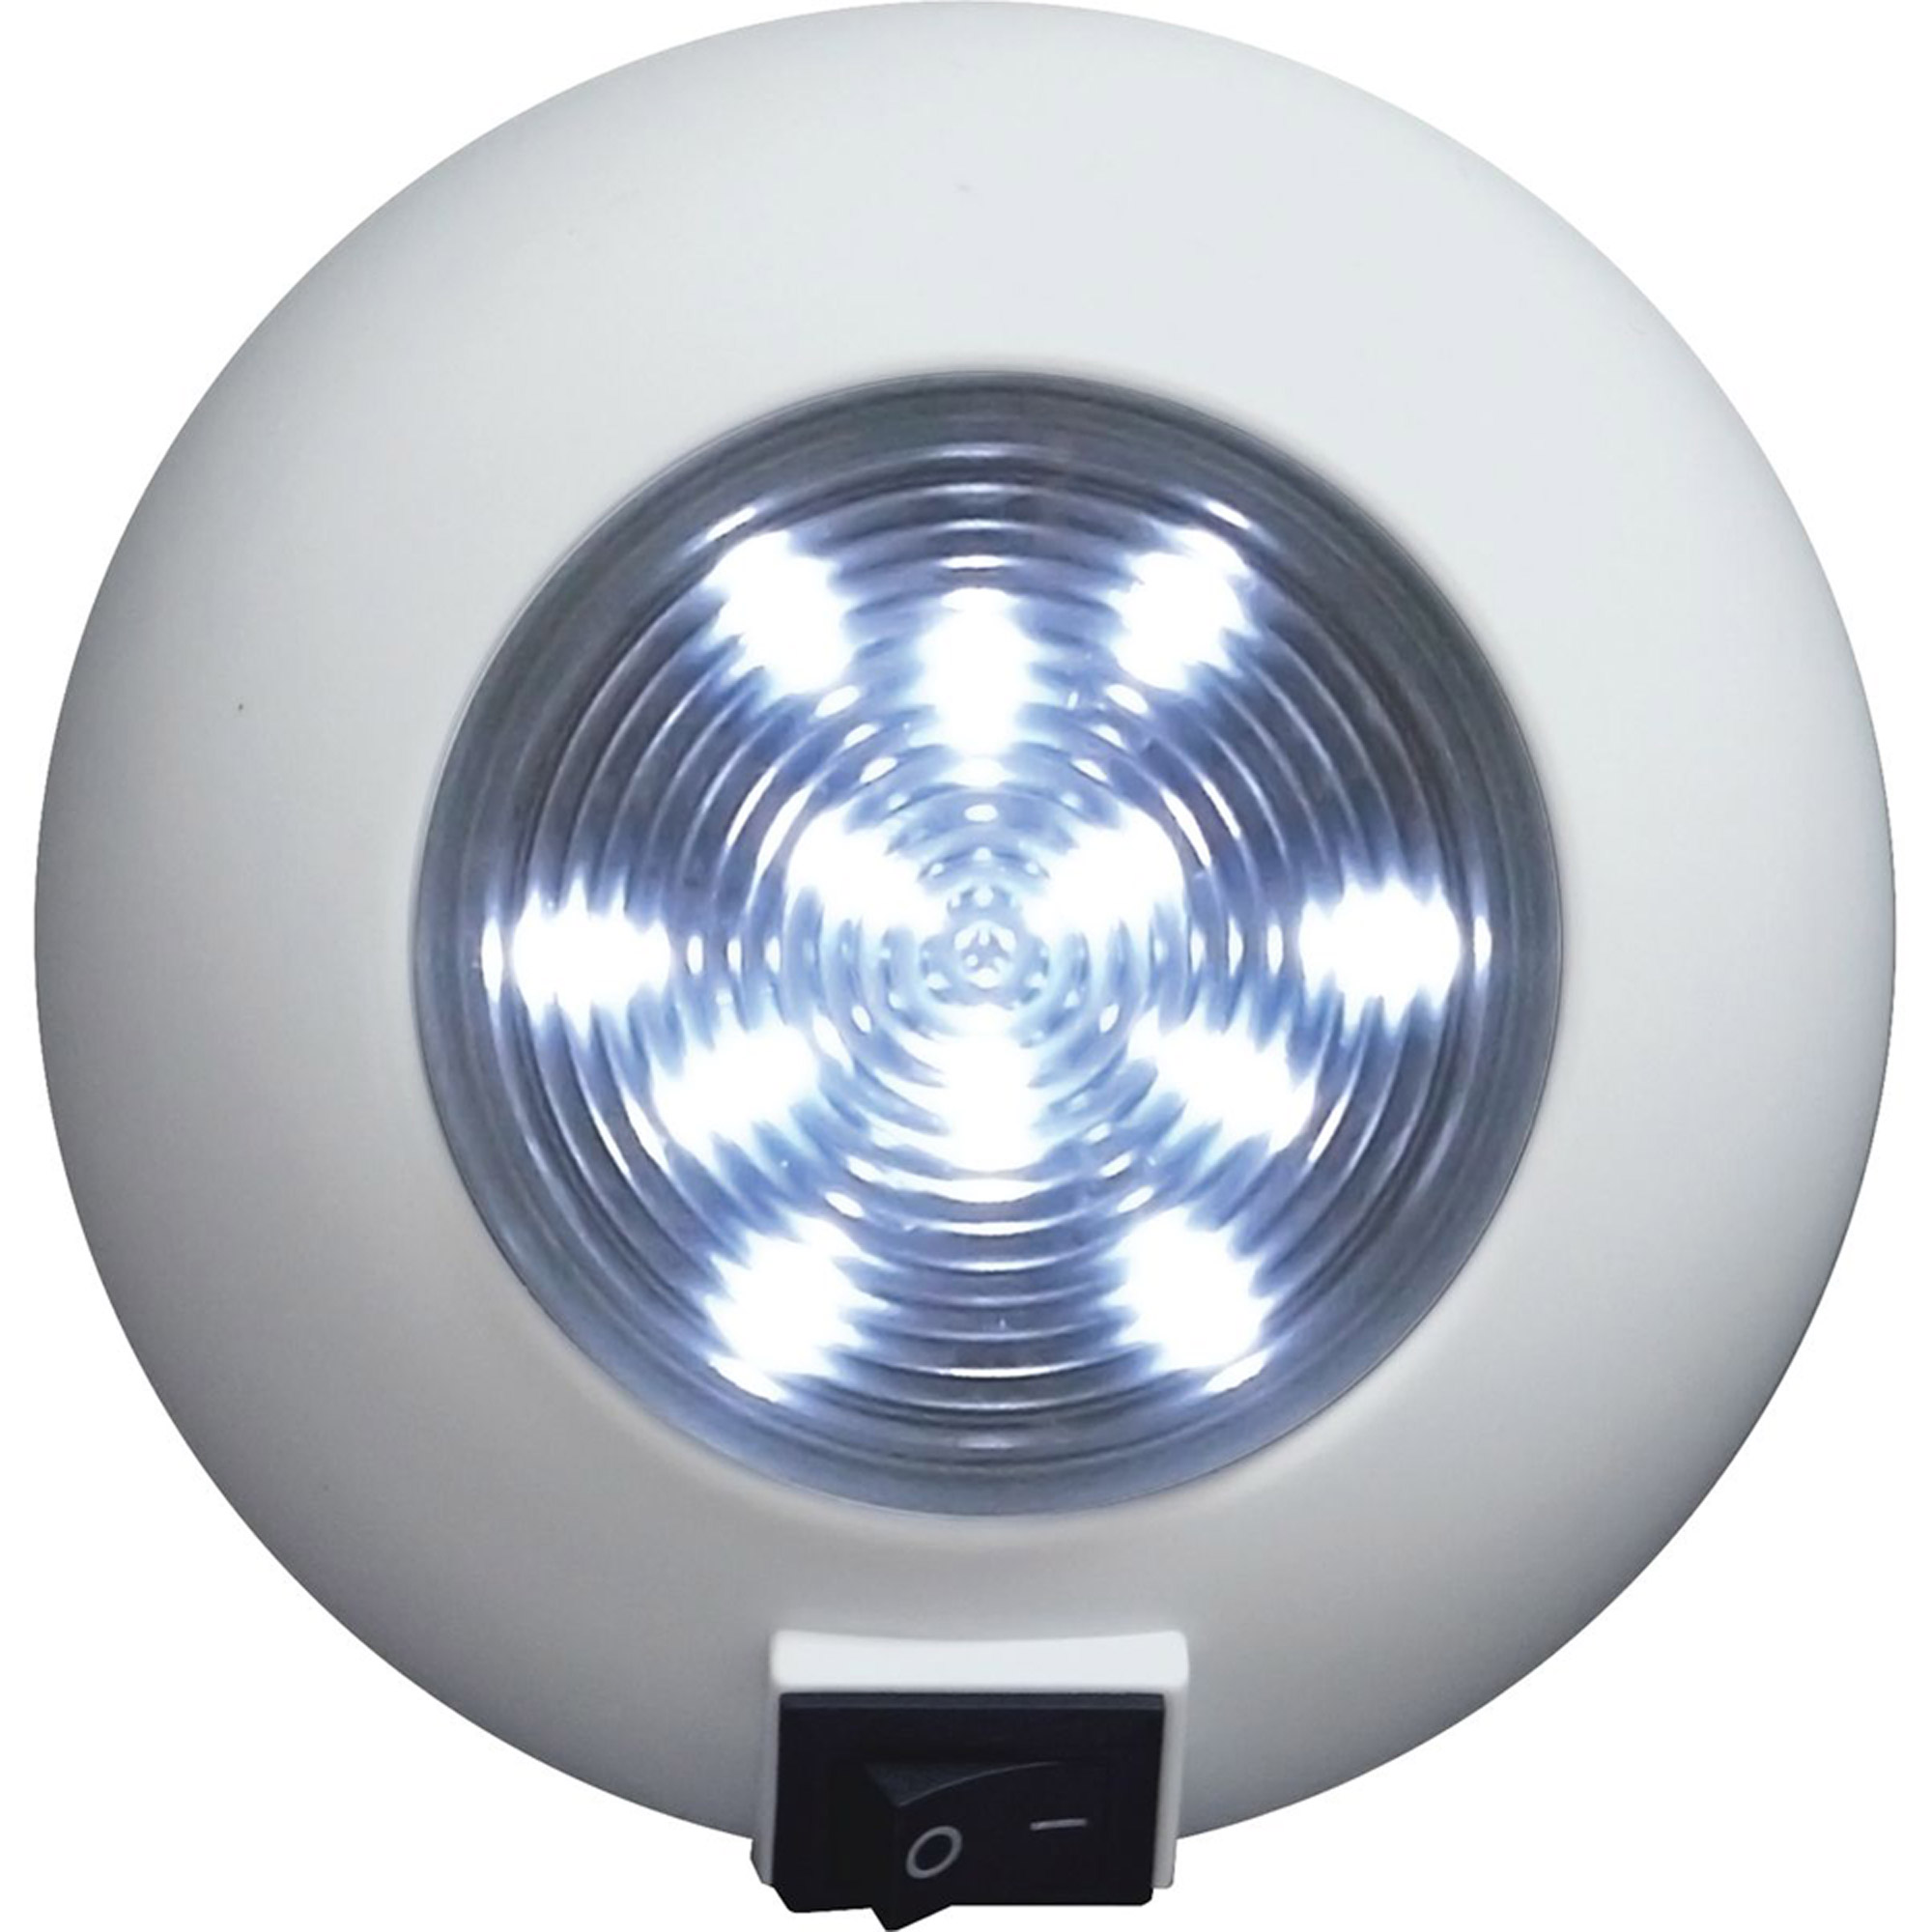 SeaSense Surface Mount 21 LED Accent Light, 12 White and Red